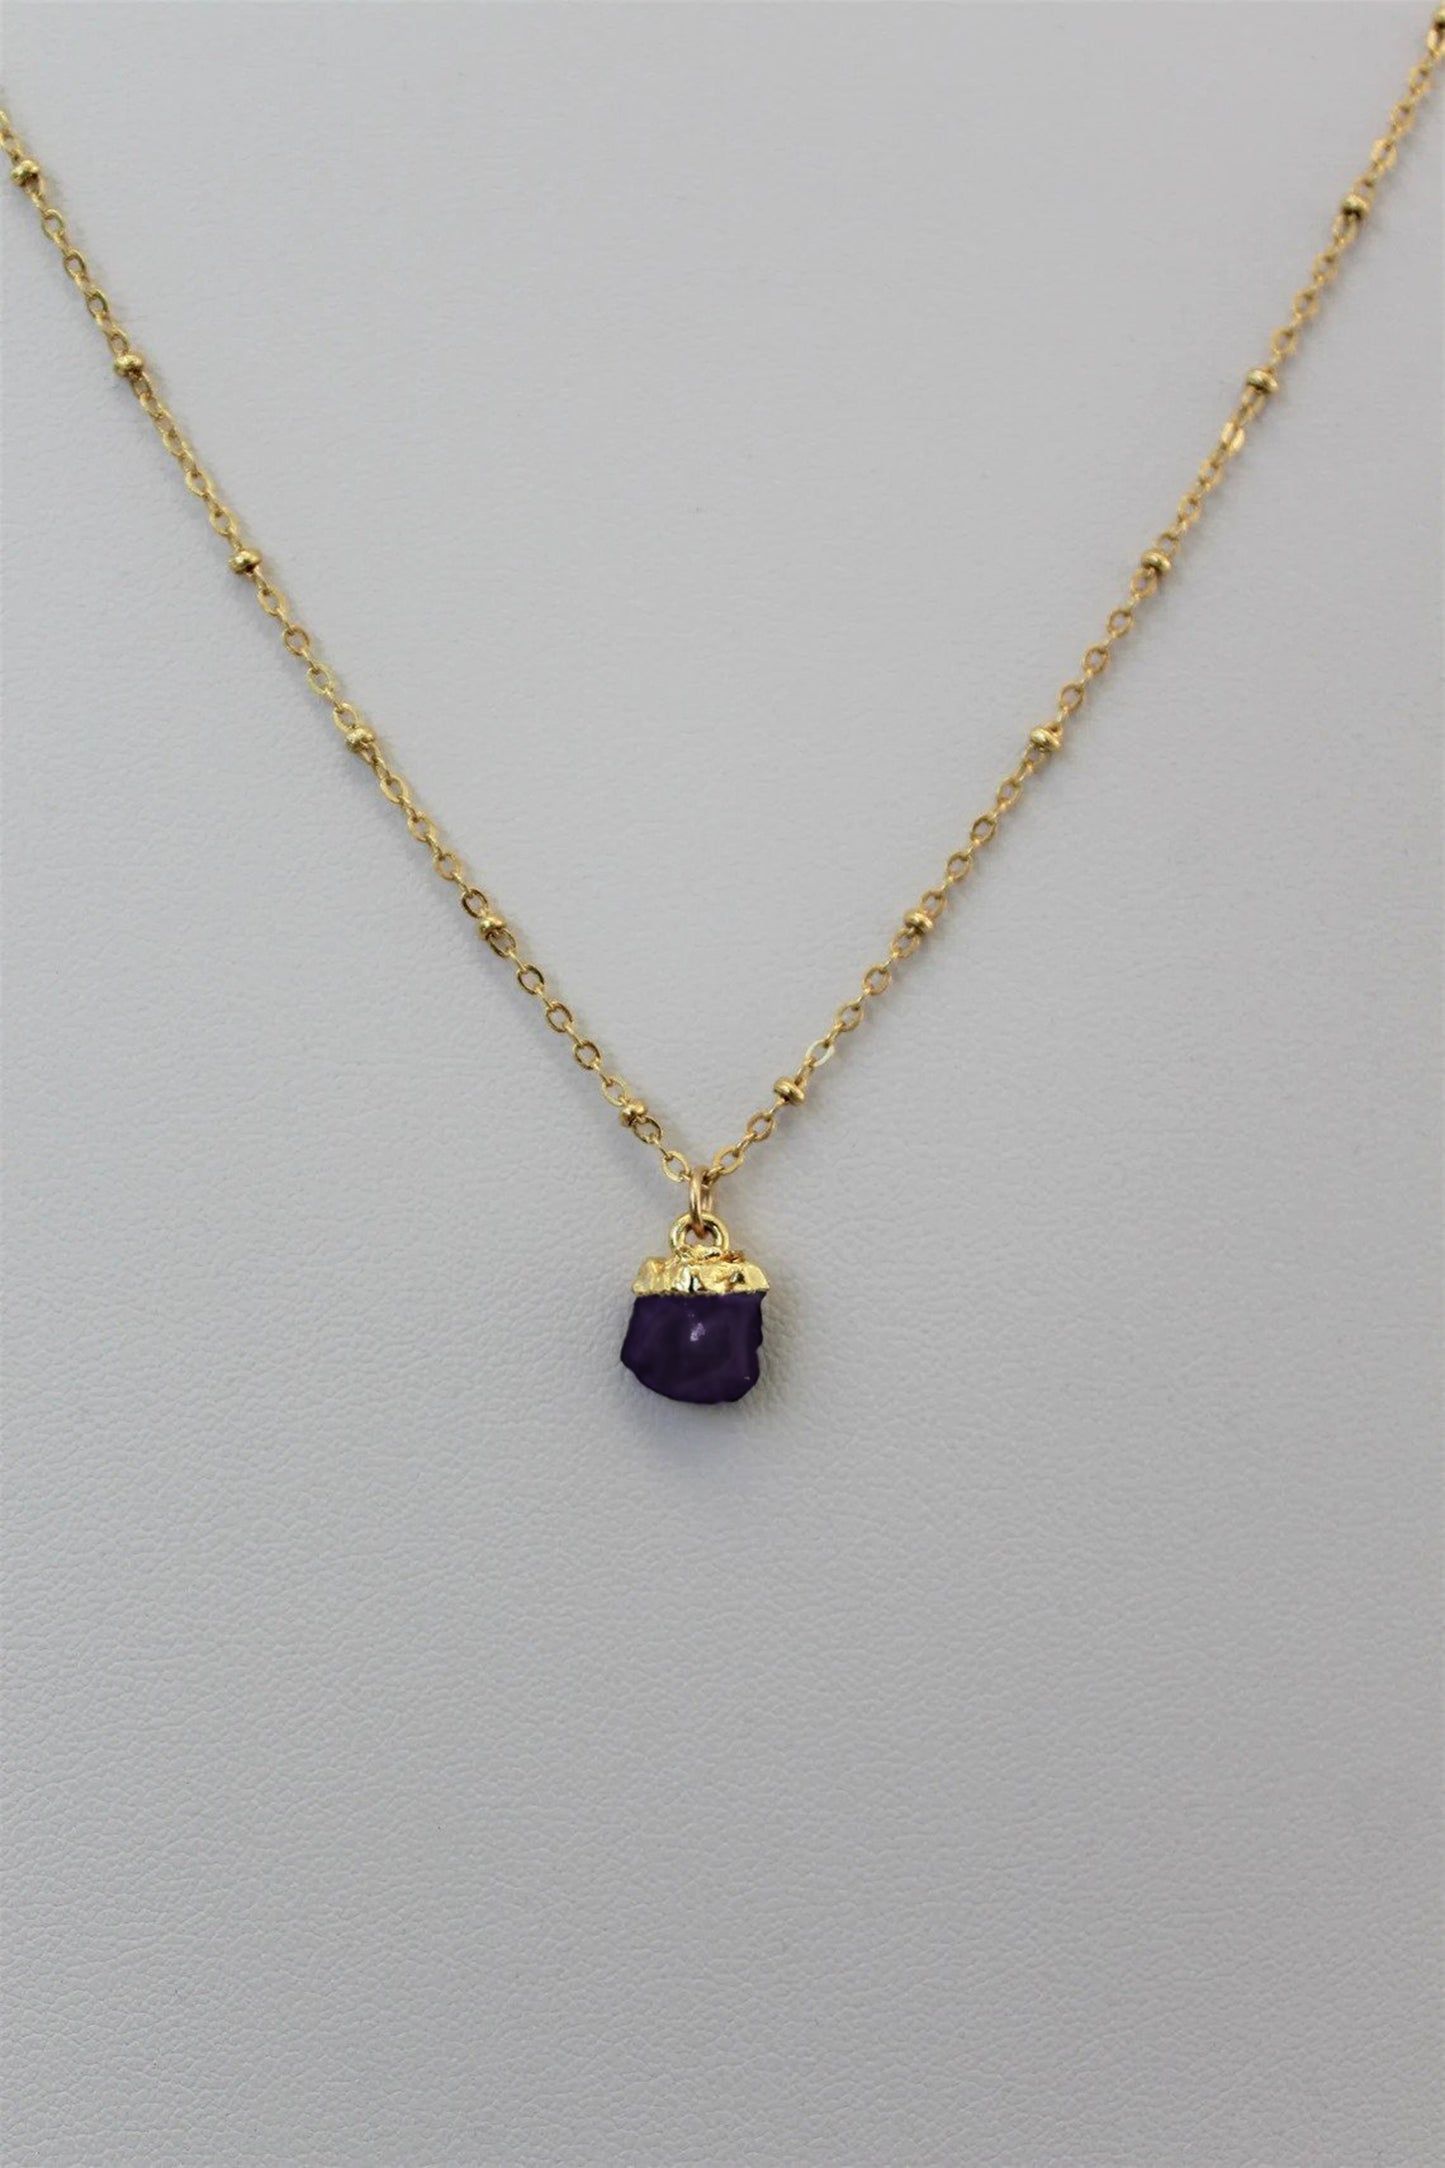 Gold filled satellite chain necklace with an electroplated natural amethyst crystal birthstone pendant displayed against a plain white textured background to showcase custom jewelry by Gilded Sapphire. 